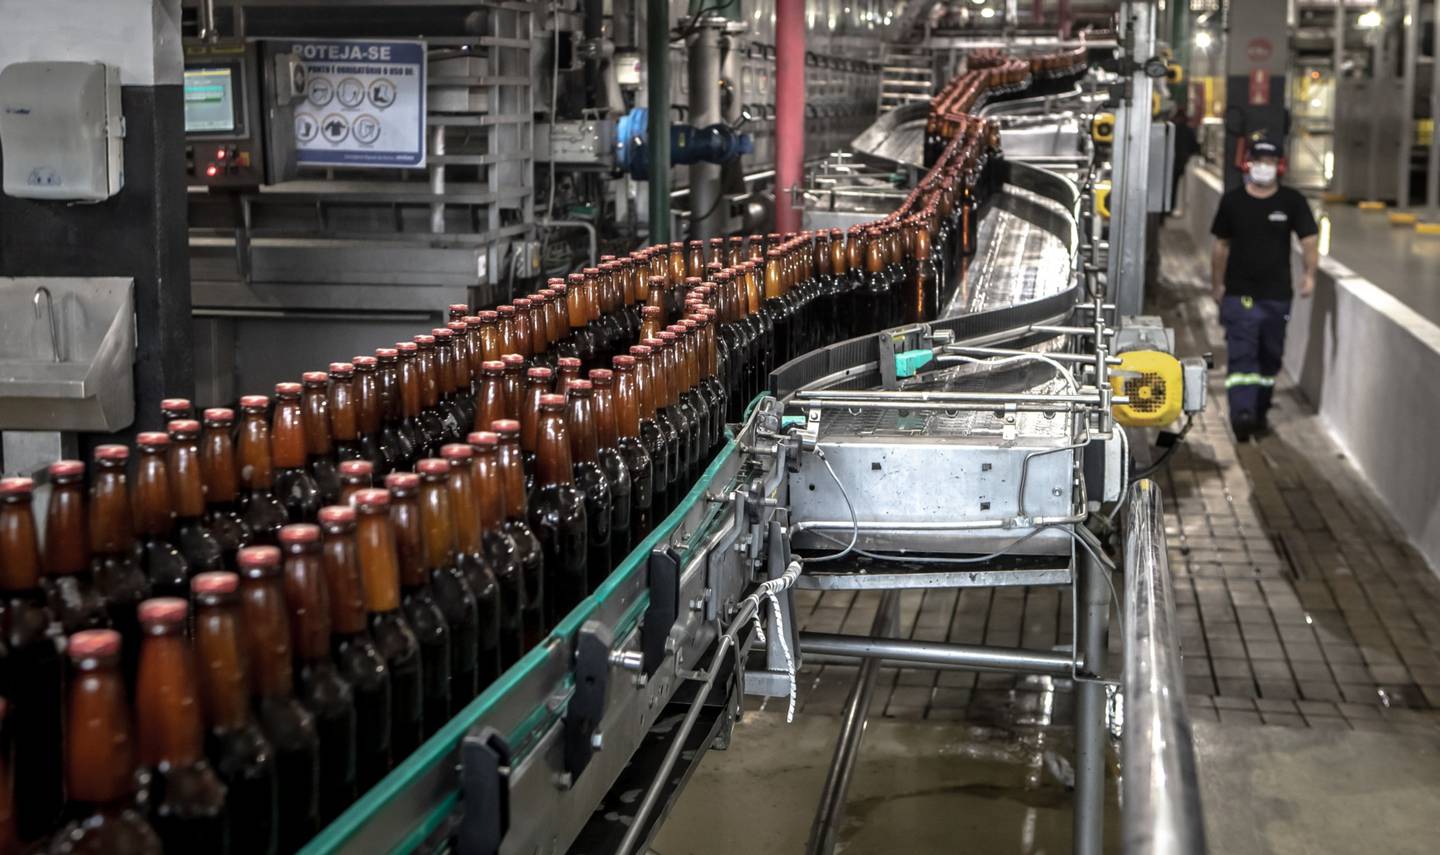 The beer production line at the Ambev SA bottling facility in Sao Paulo, Brazil, on Thursday, Nov. 5, 2020. Ambev, the unit of Anheuser-Busch InBev that operates in 16 countries, said its Brazil beer volume surged 25% in the third quarter from a year earlier after Brazilians used emergency stipends to boost sales. Photographer: Jonne Roriz/Bloomberg